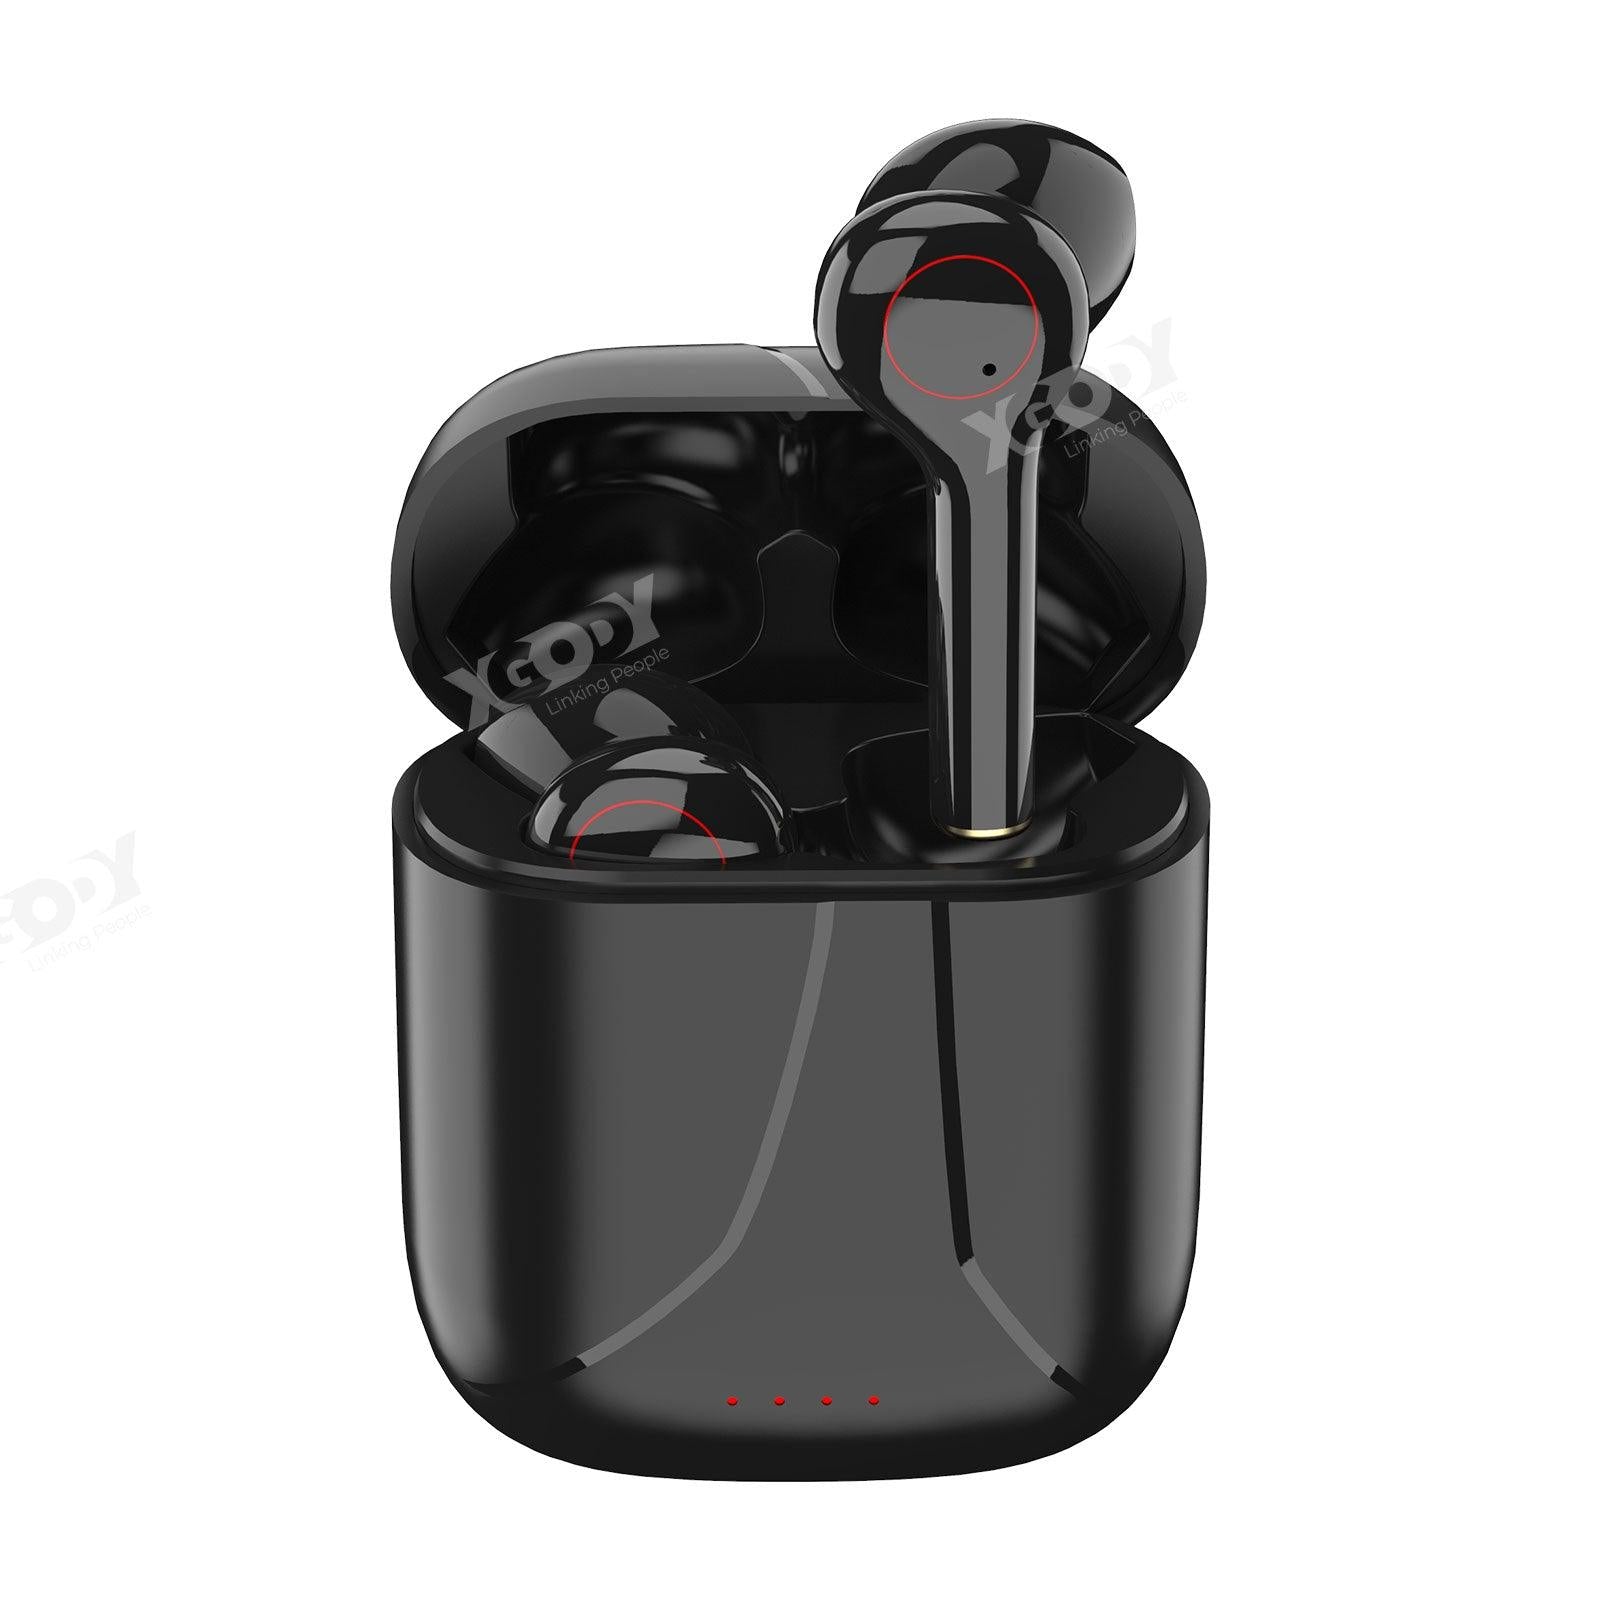 Cost-effective and Most worthwhile XGODY L31 Bluetooth 5.0 Headset TWS Wireless Earphones HD Earbuds Touch Control - XGODY 